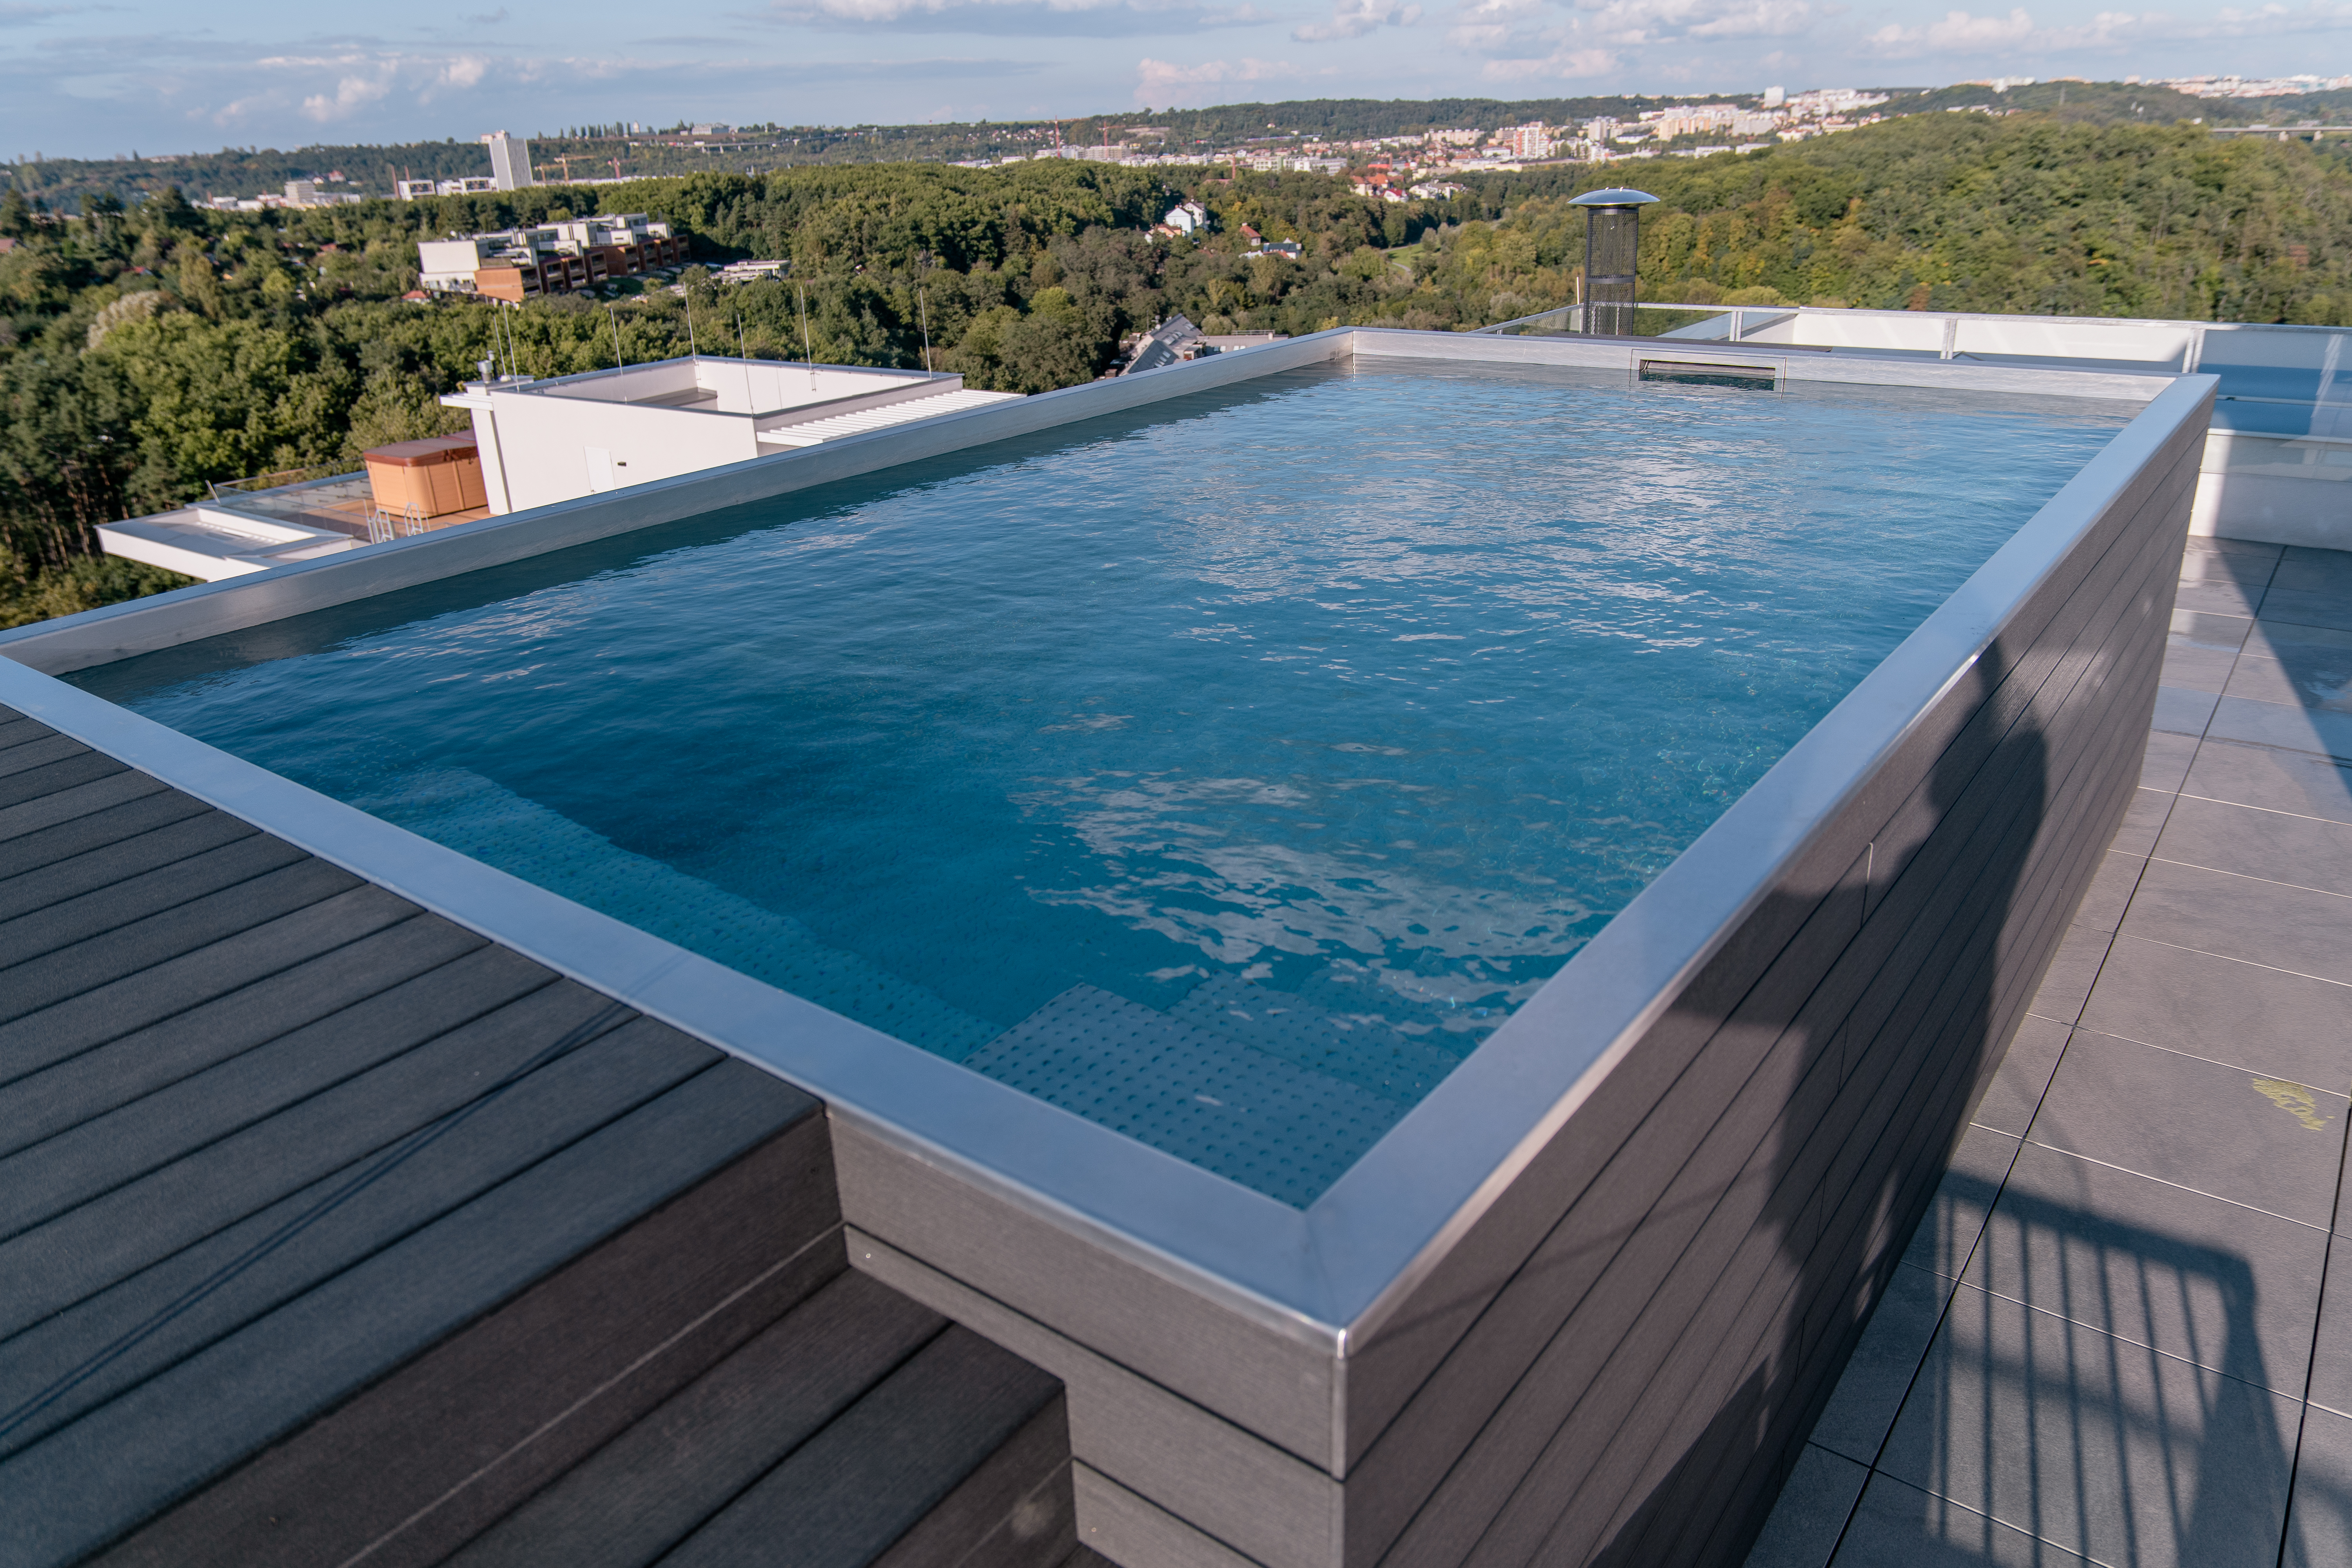 Unique-IMAGINOX-stainless-steel-pool-on-the-rooftop-of-the-apartment-complex